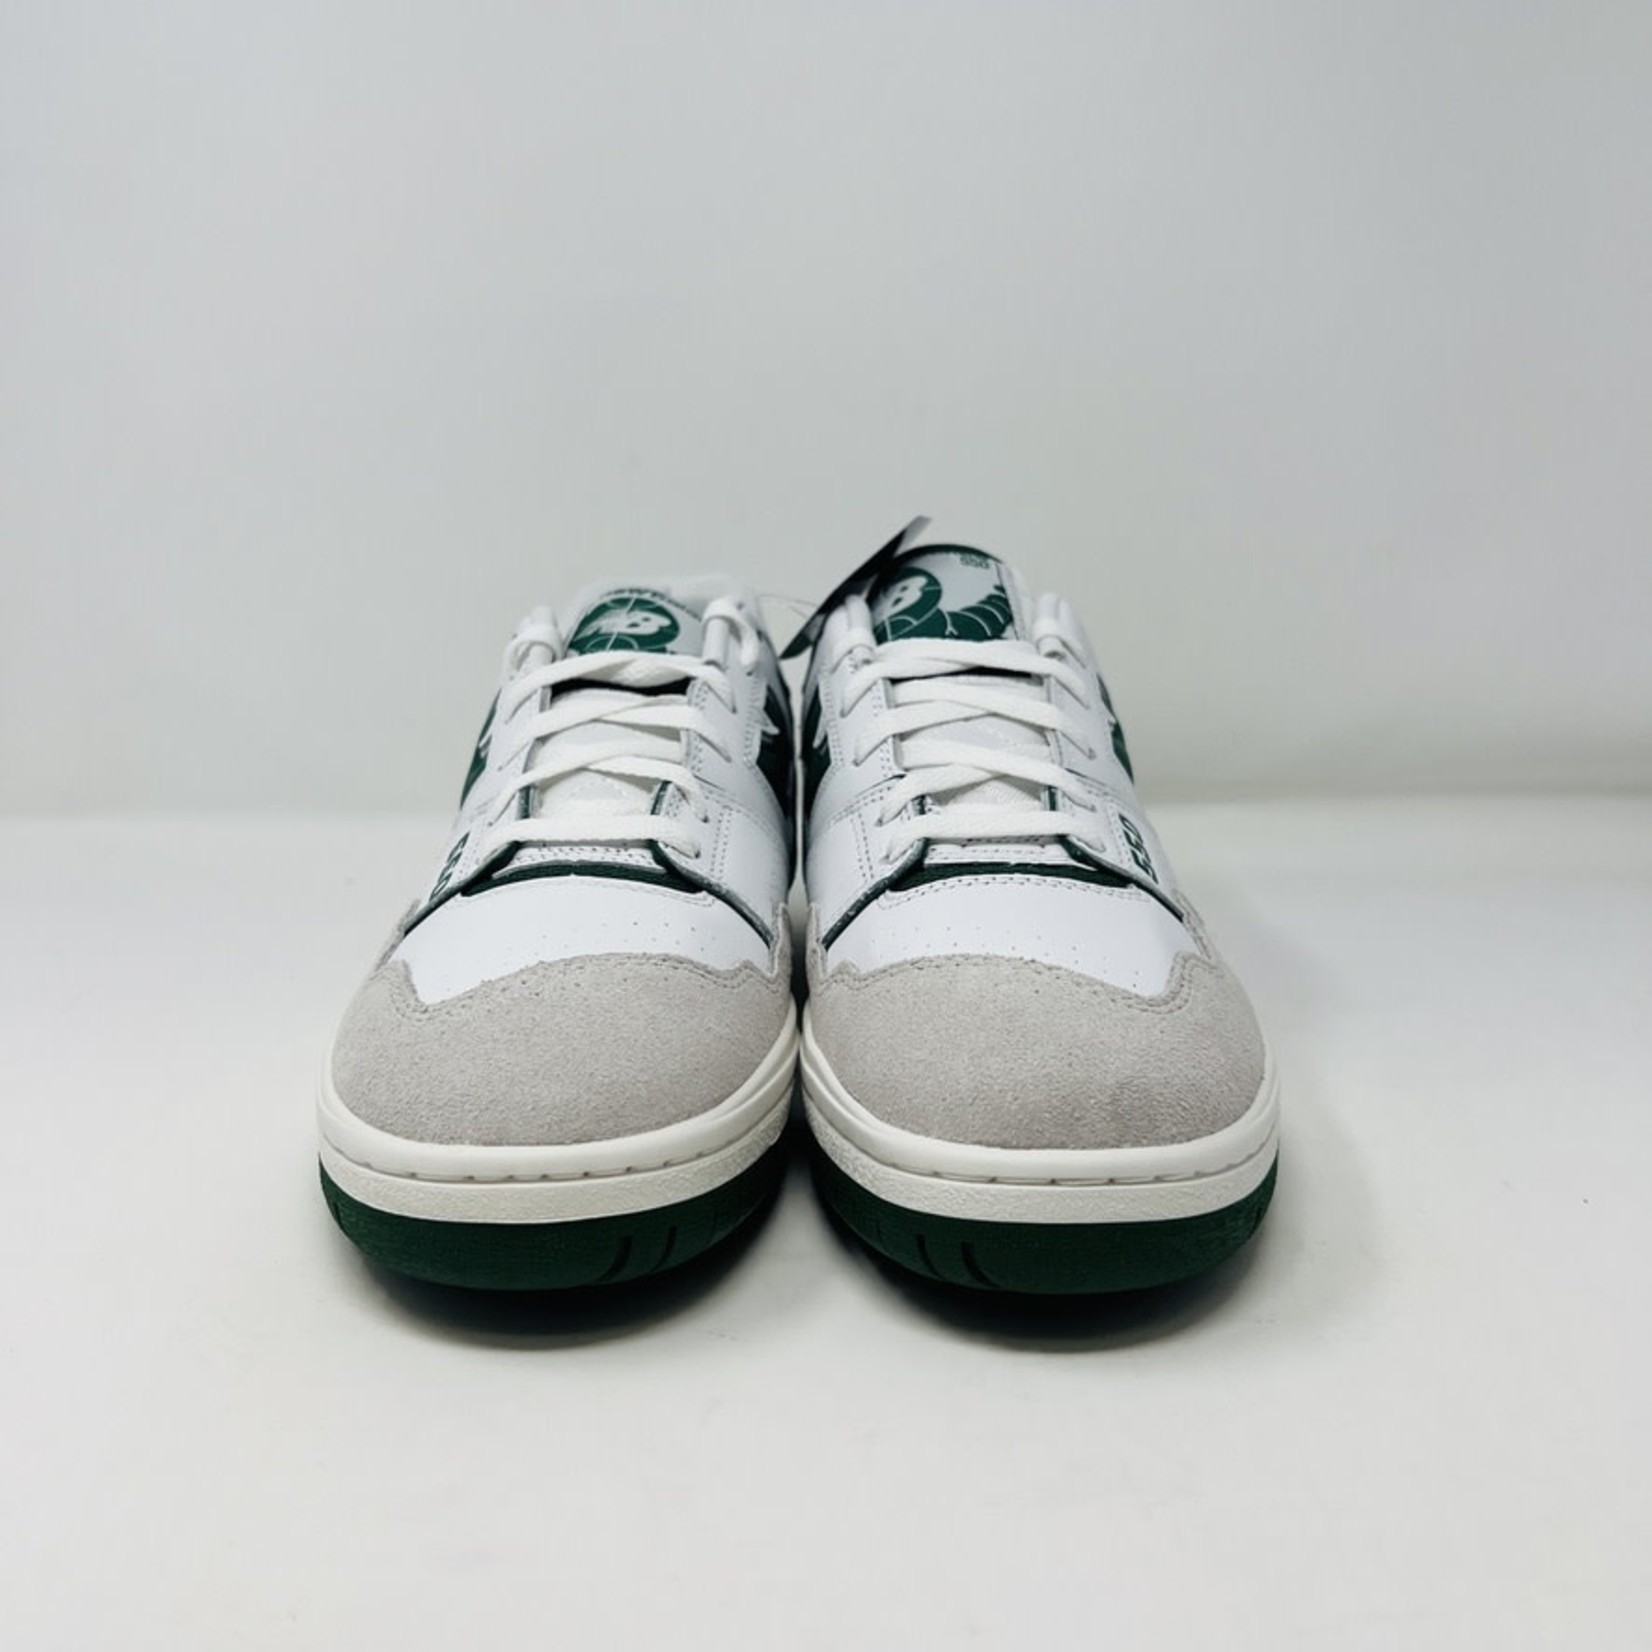 New Balance 550 White Green - Holy Ground Sneaker Shop - Buy, Sell ...